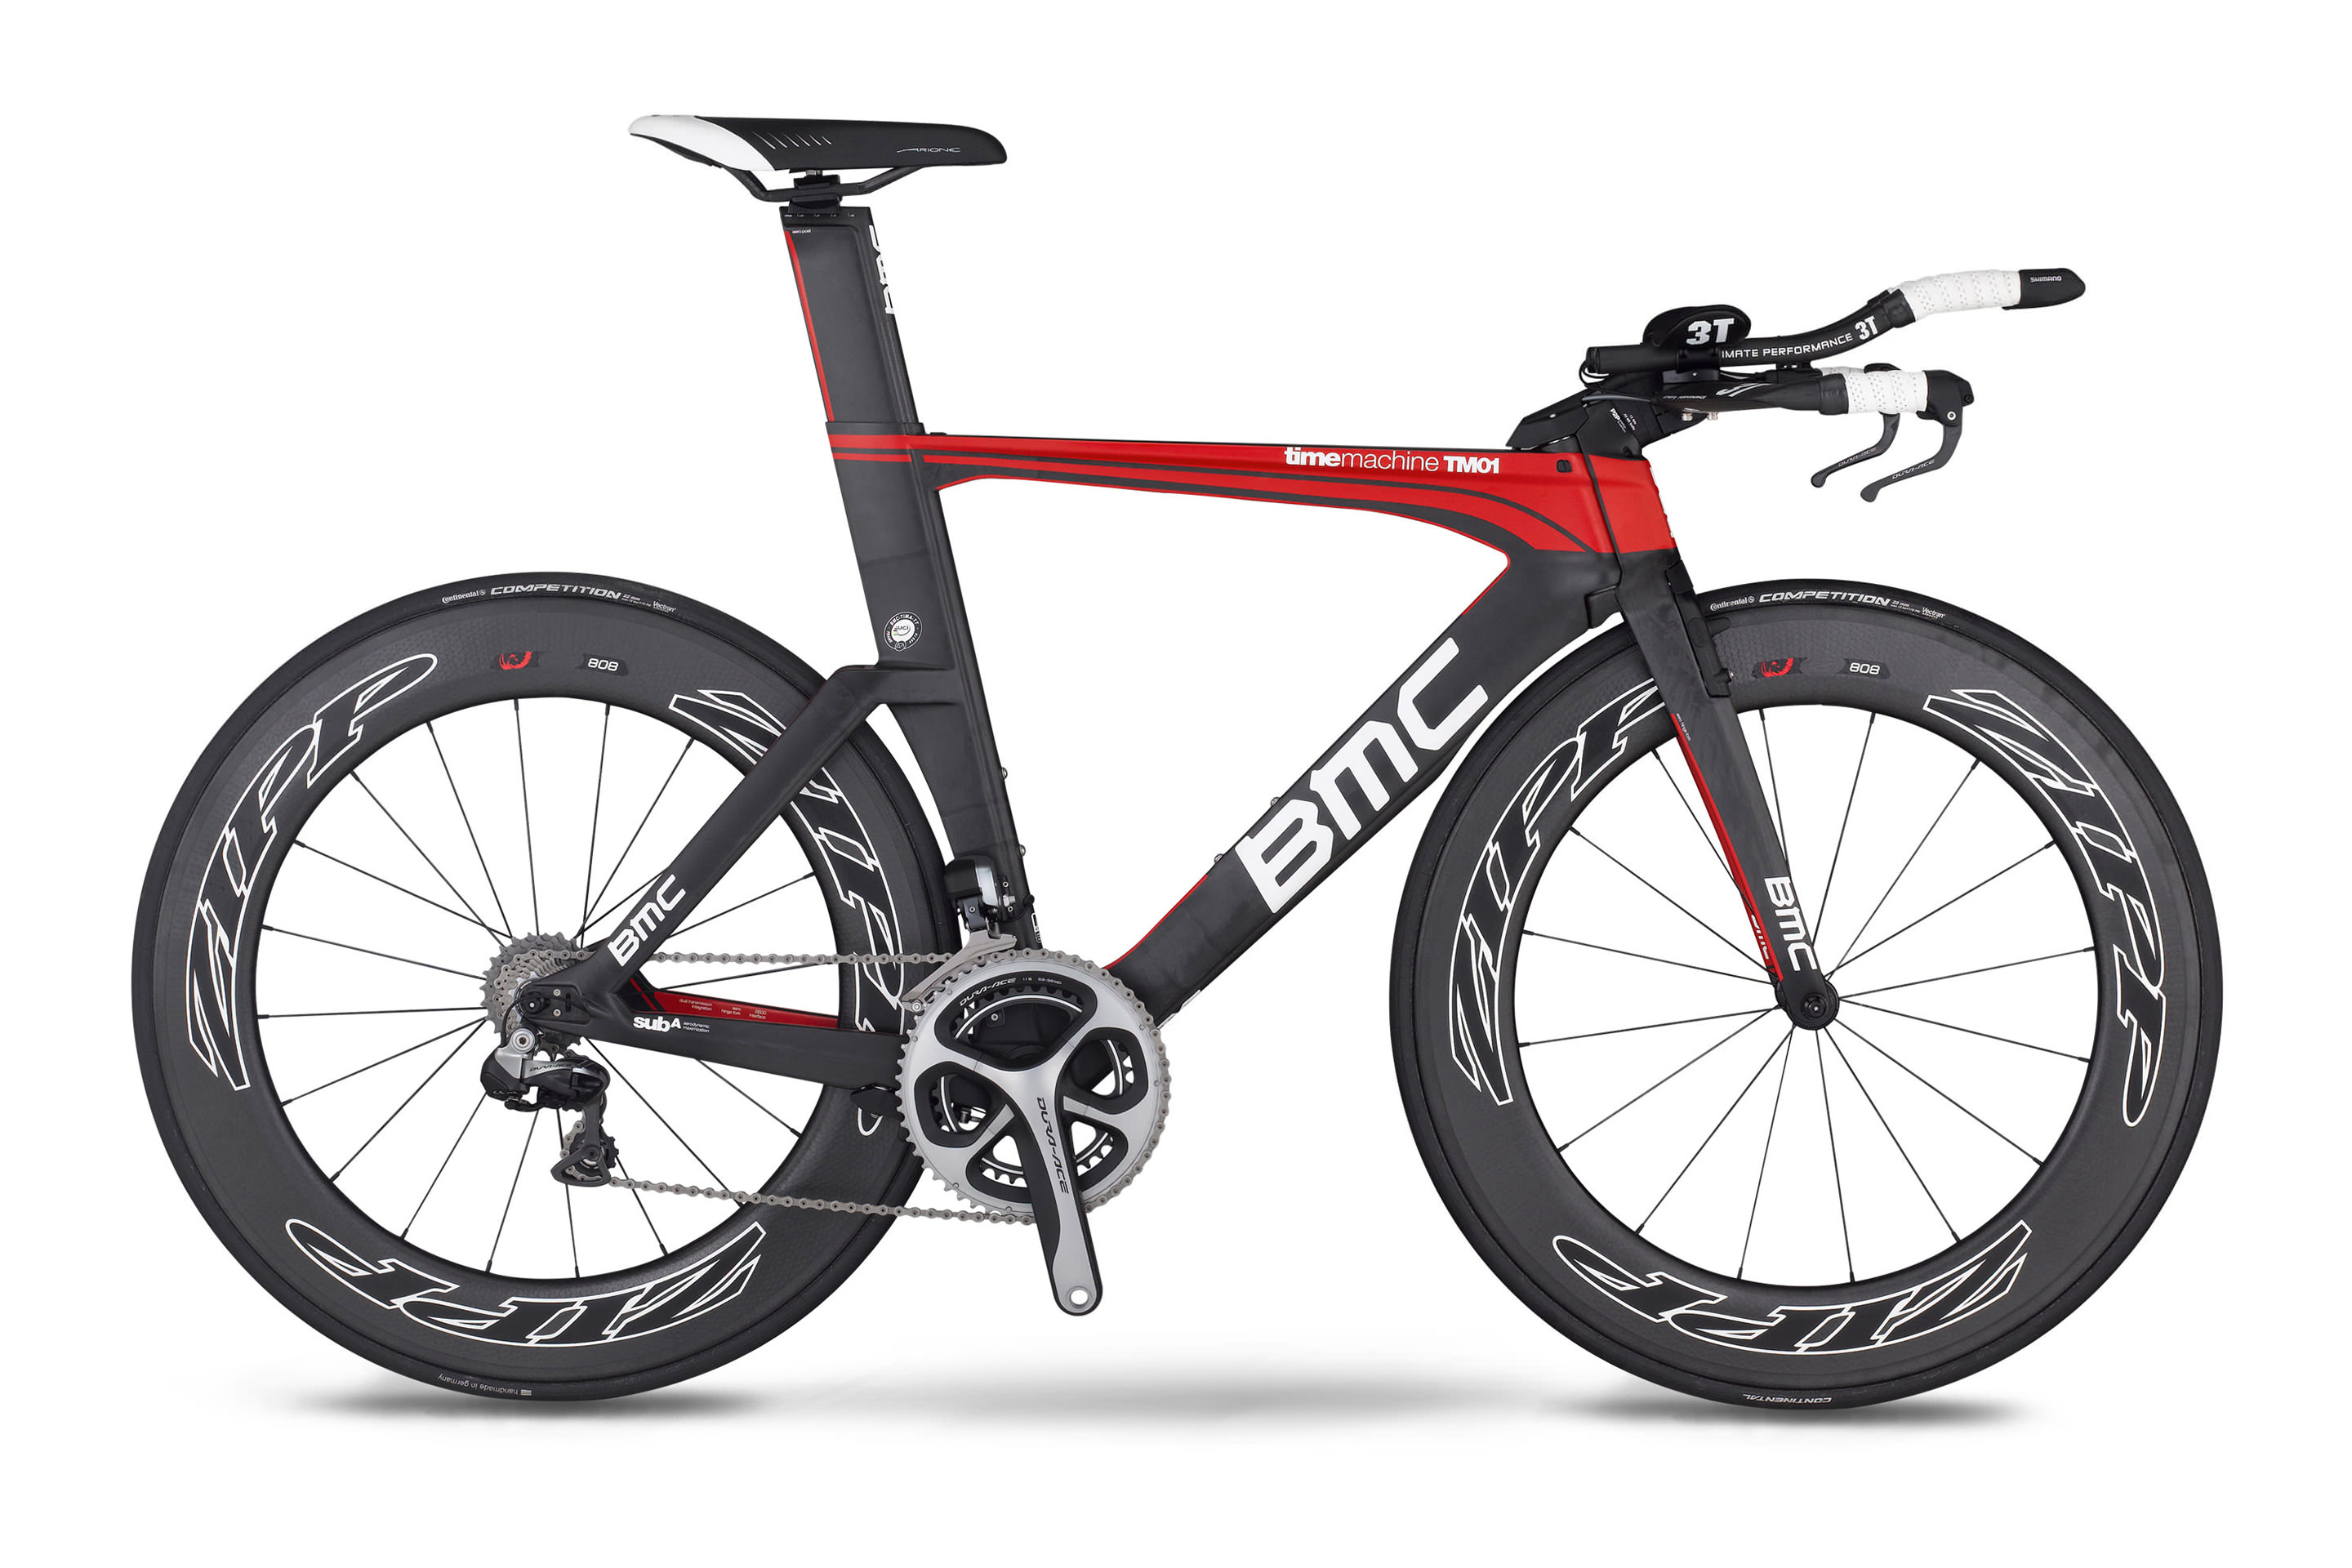 2014 TimeMachine TM01 Dura-Ace Di2 | Bouticycle